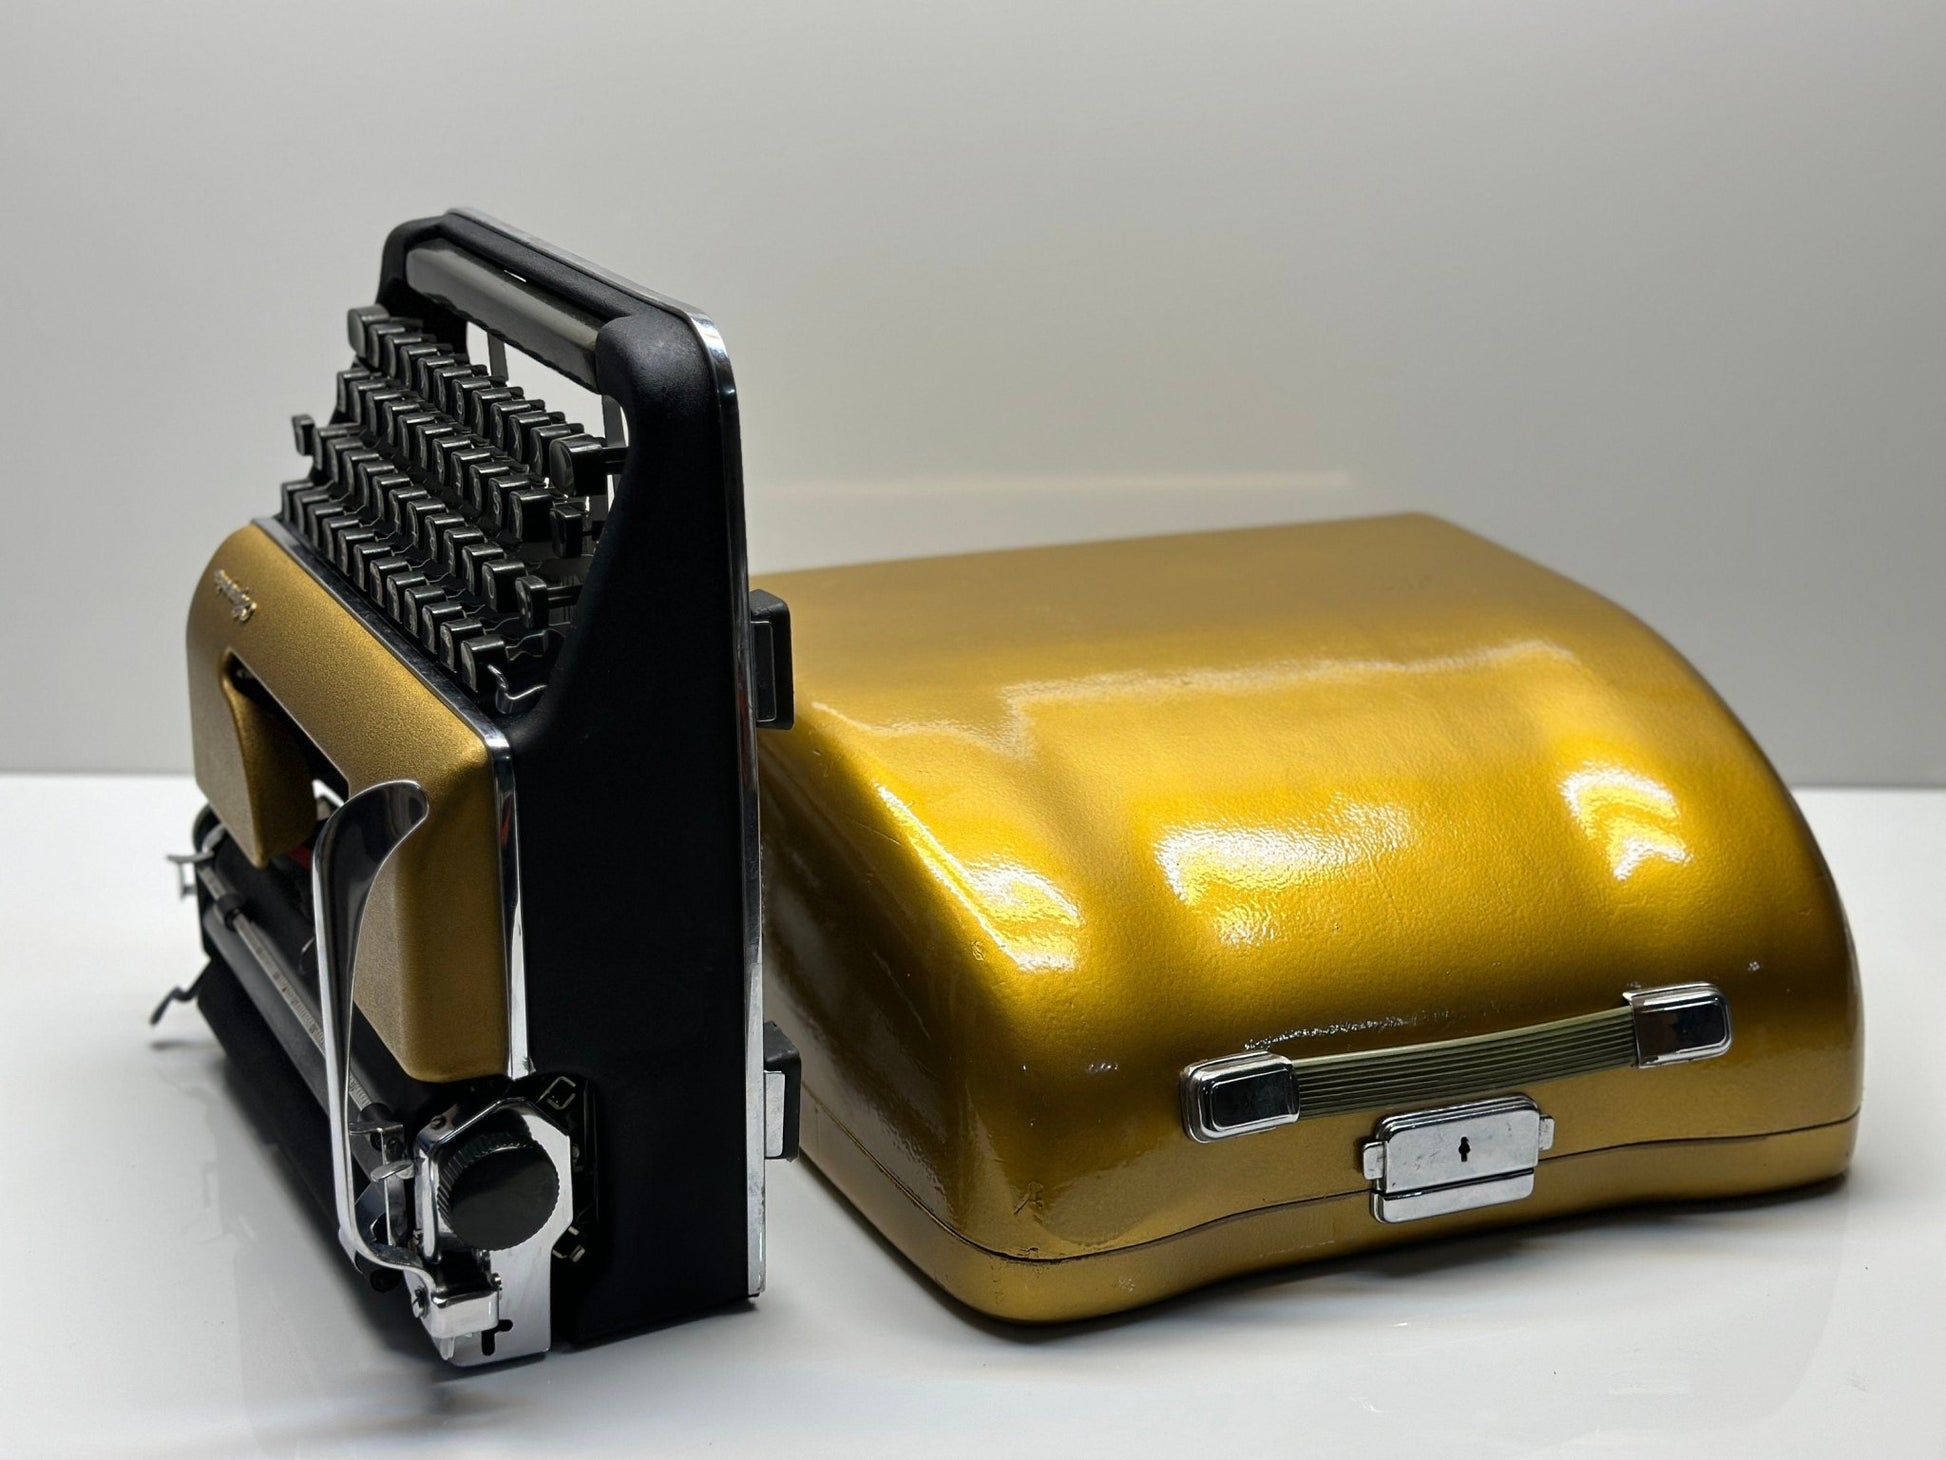 Gold Olympia SM3 Typewriter + Gold Bag - The Perfect Gift Choice